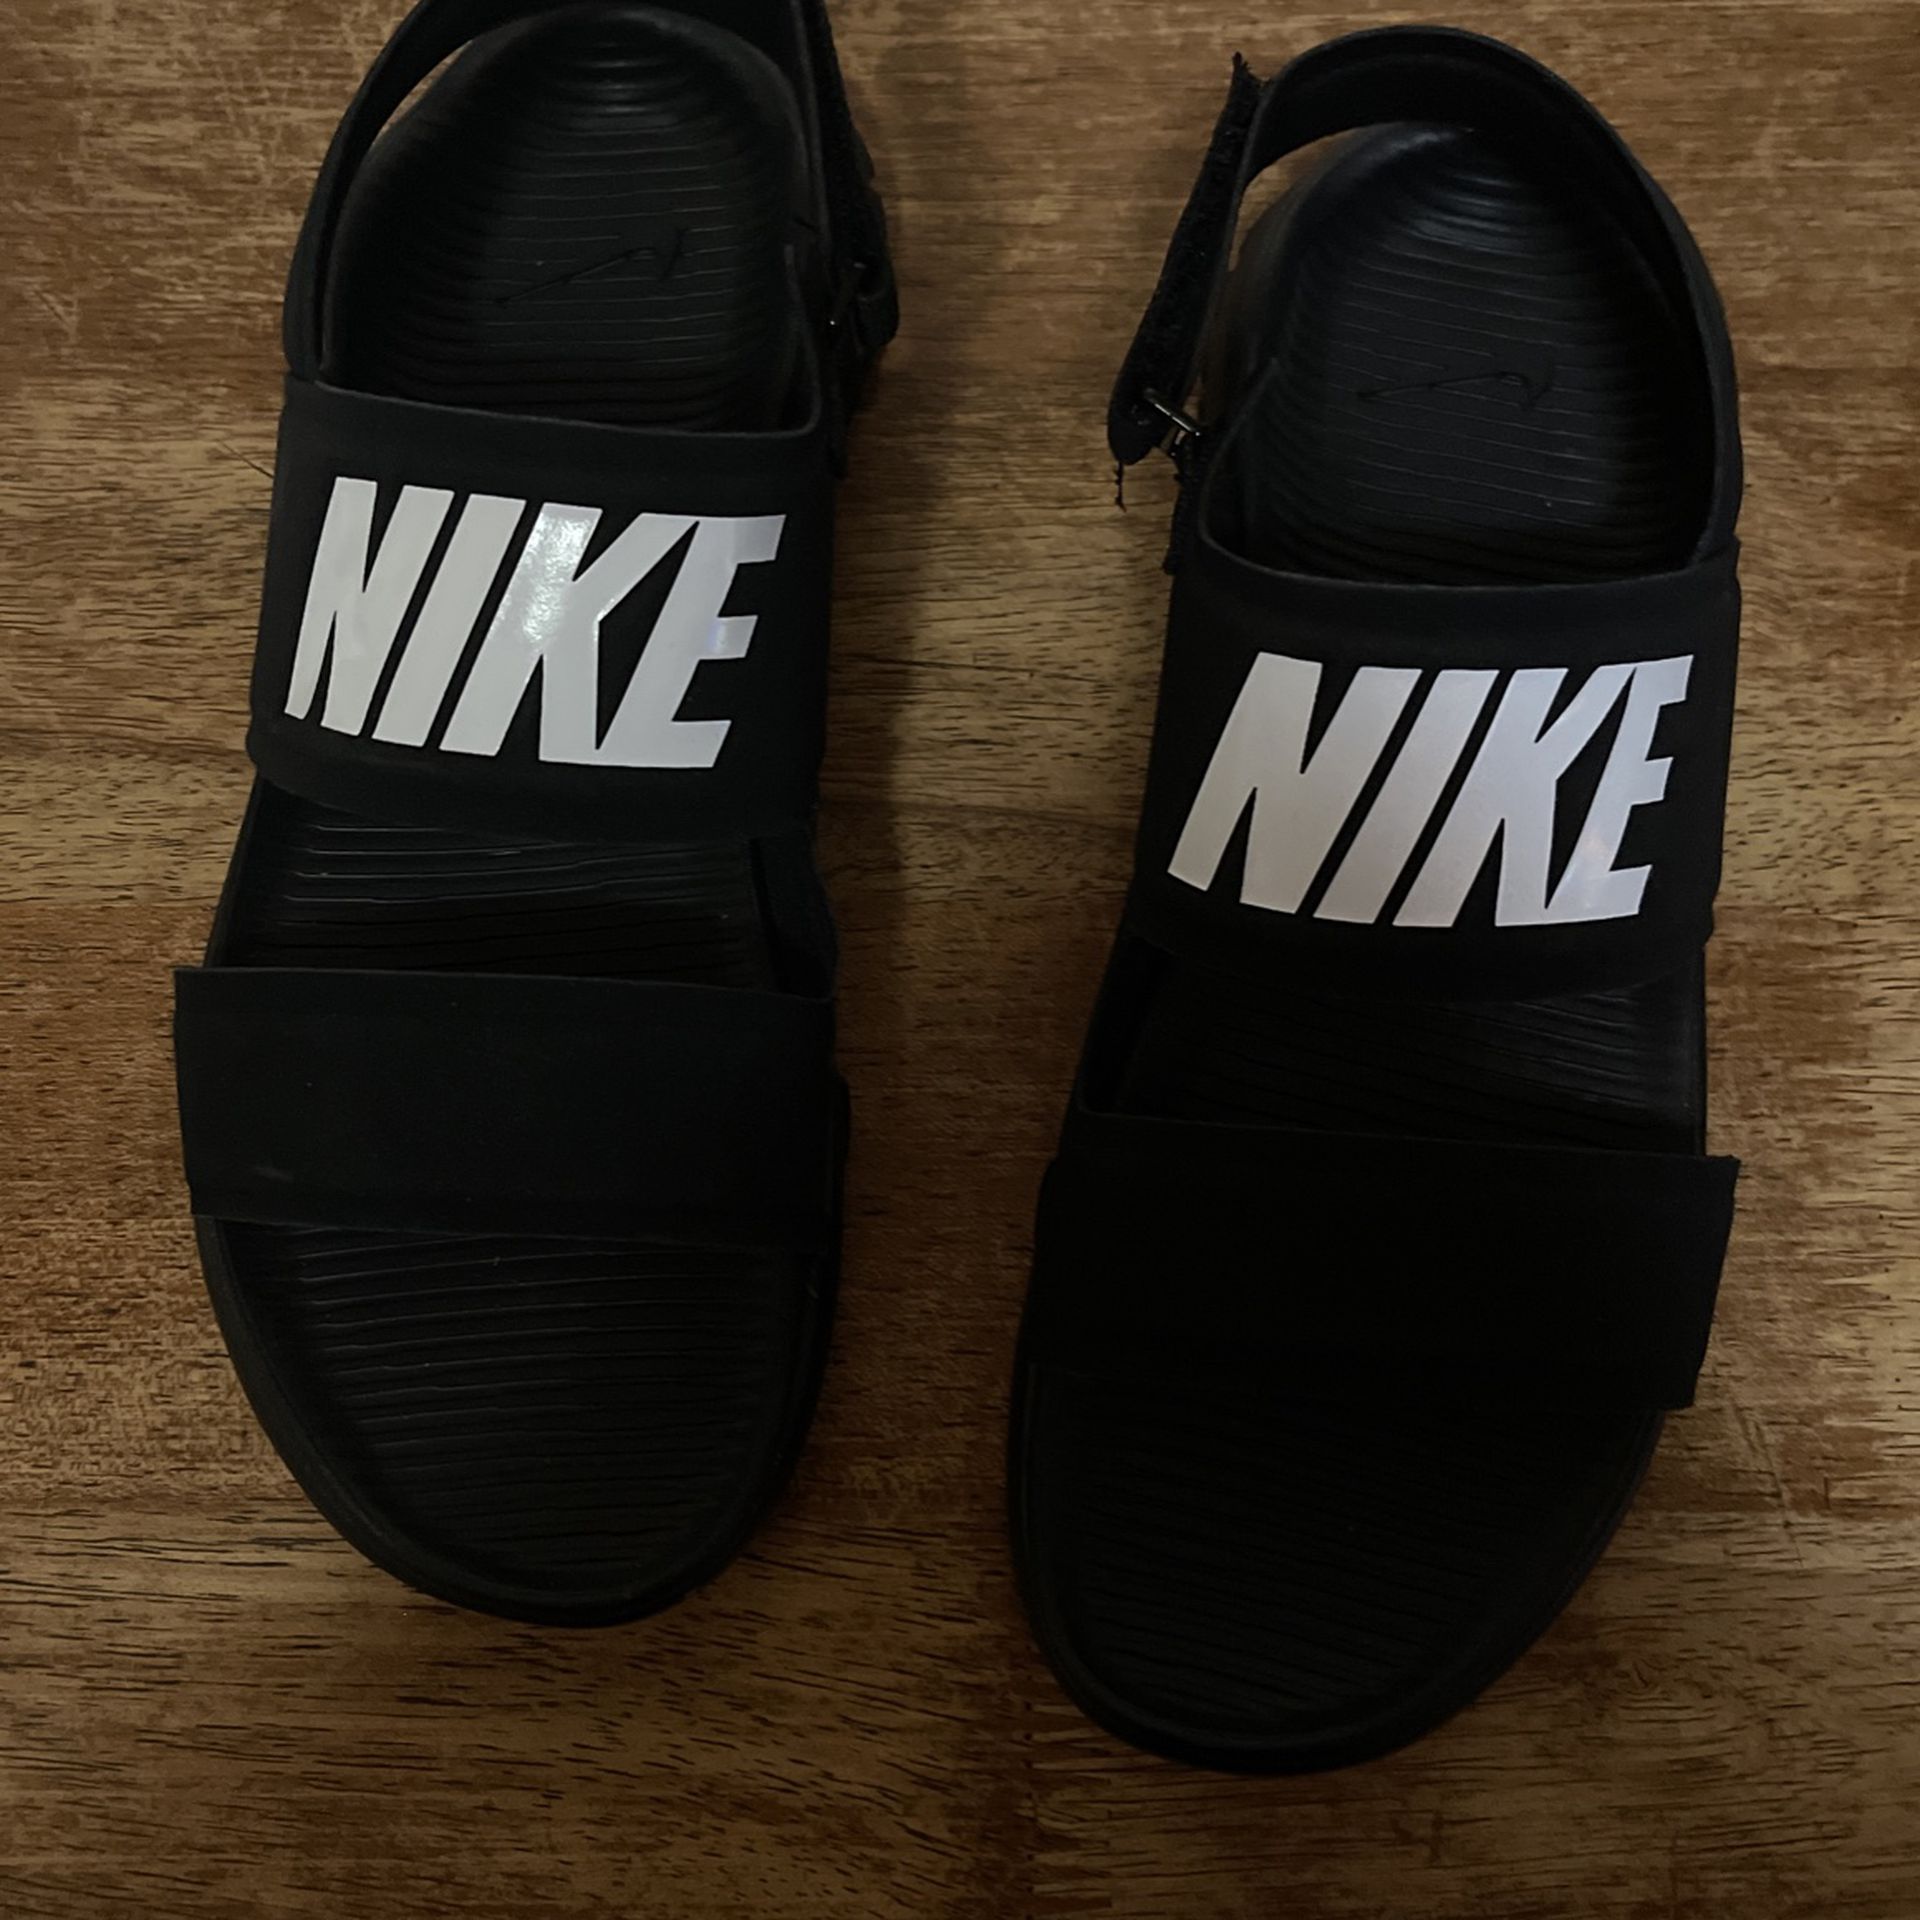 Nike Sandals - Size 6